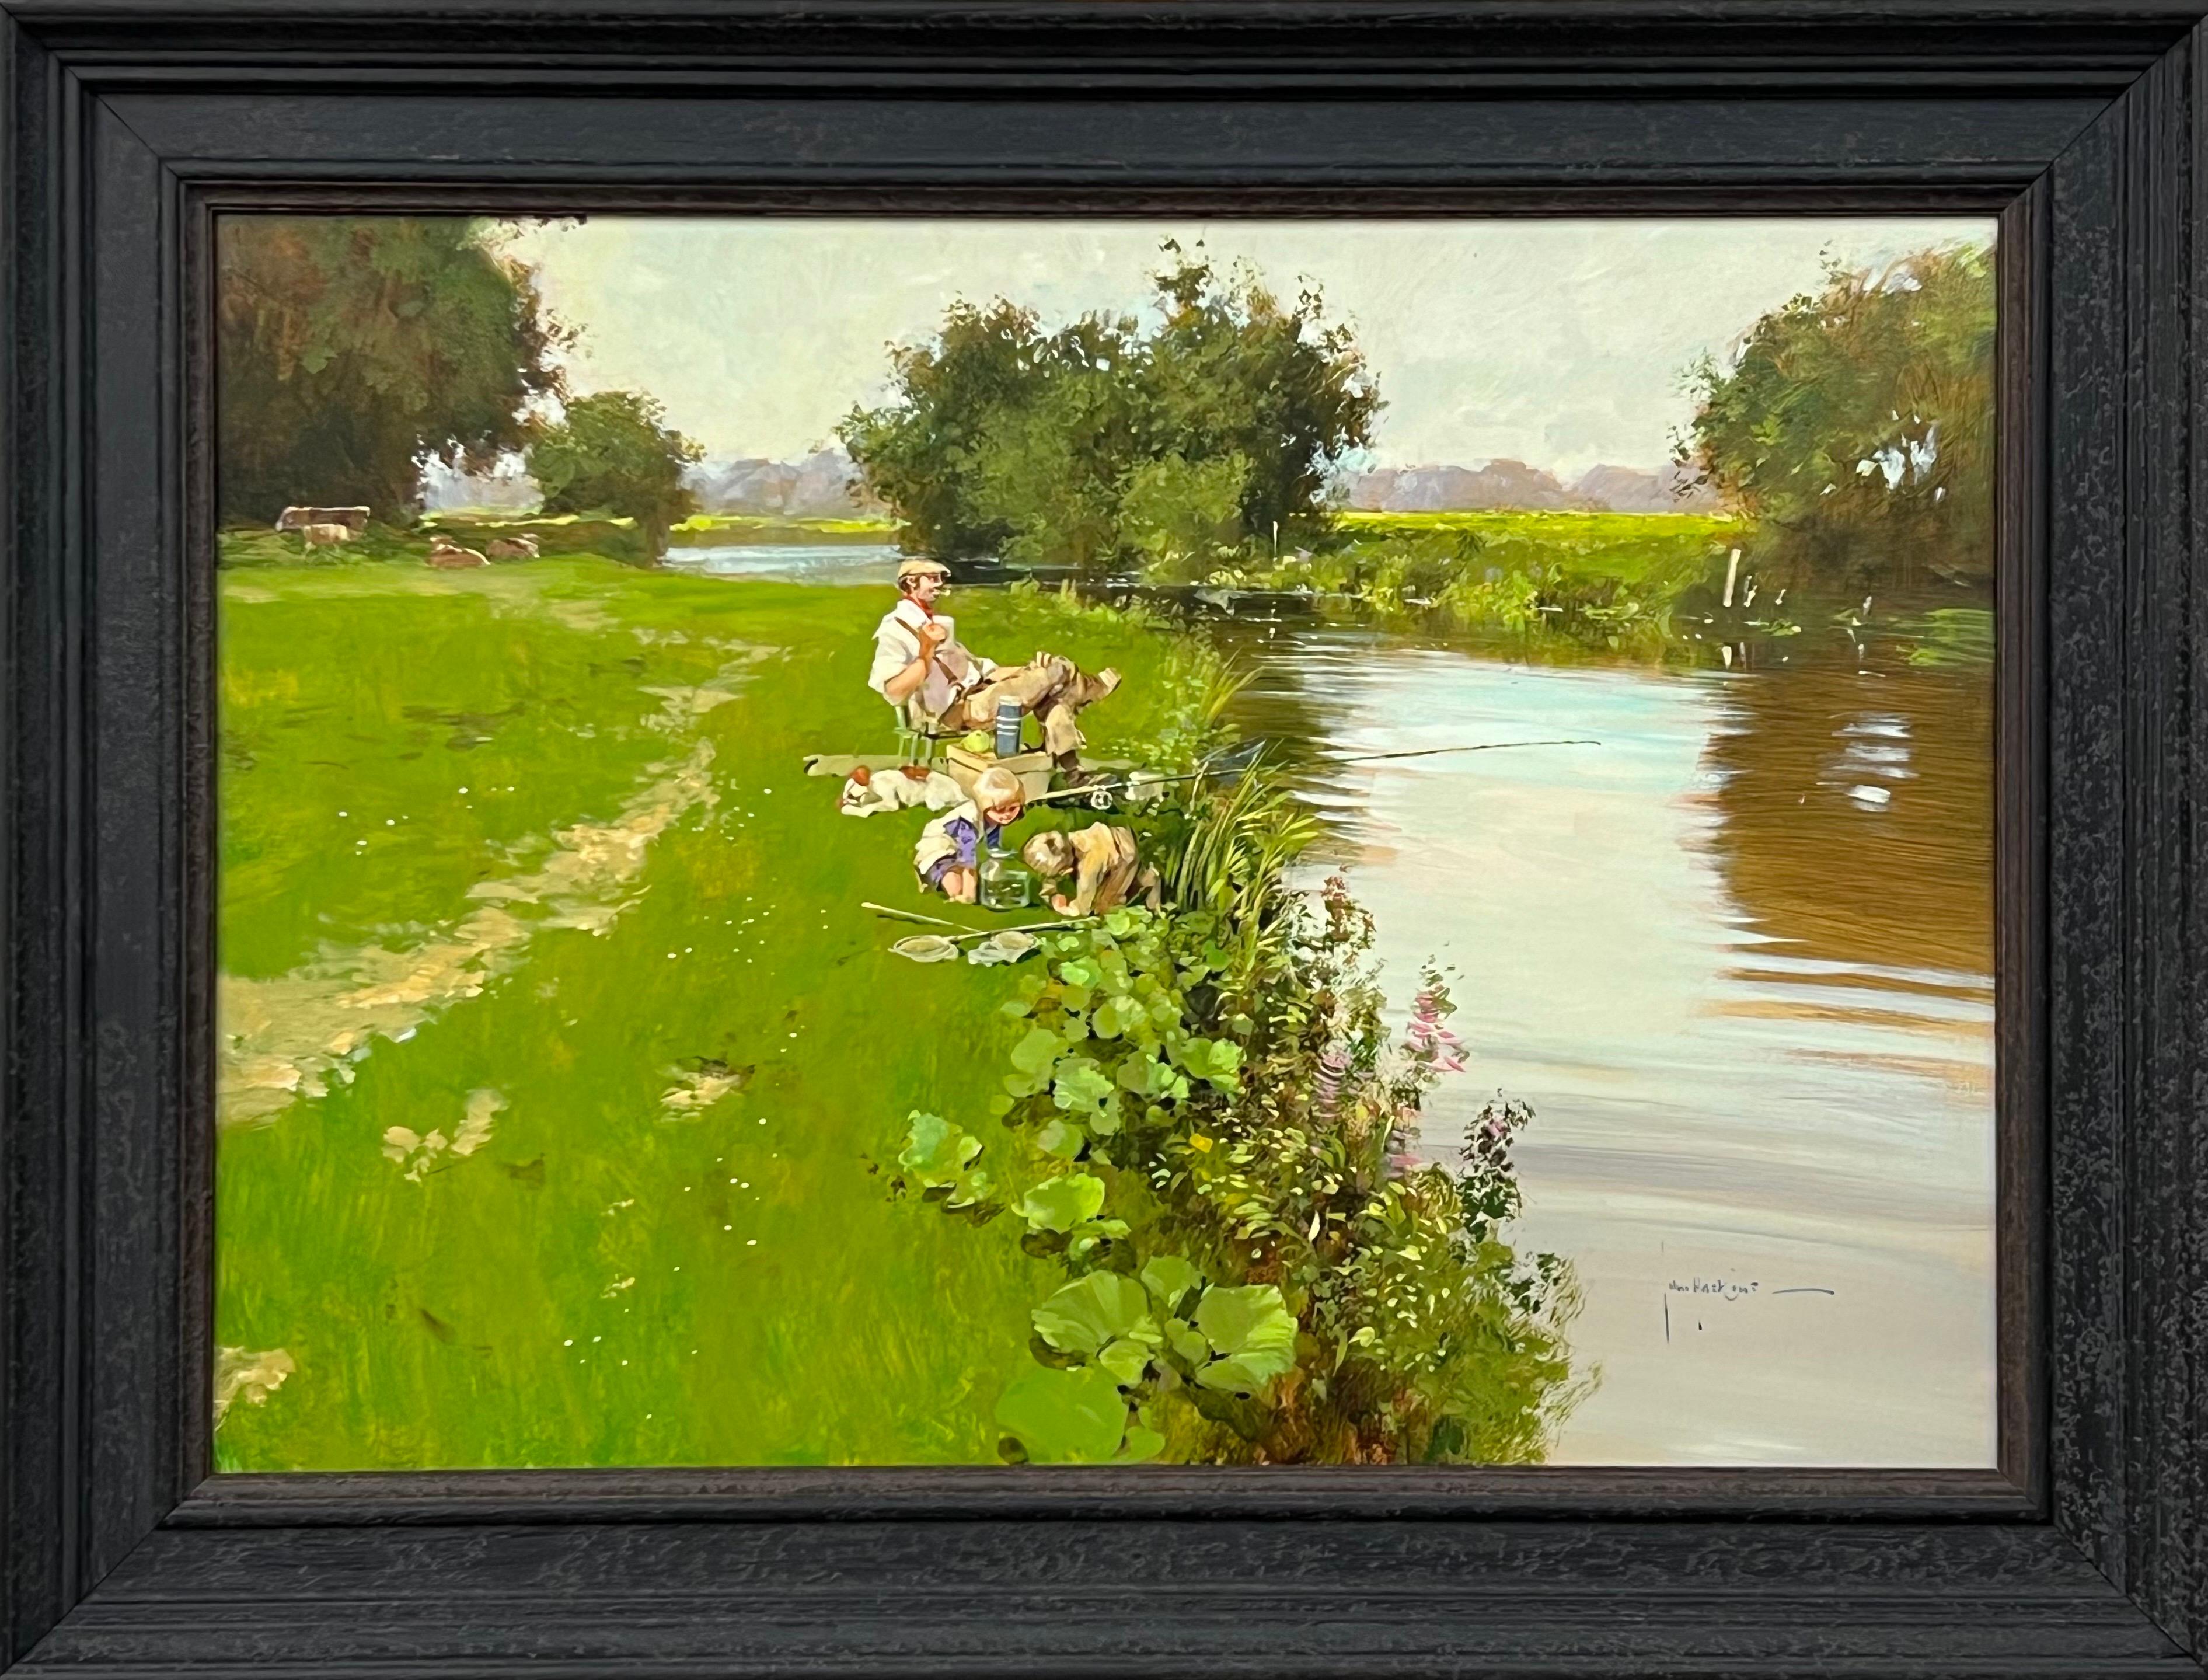 John Haskins Figurative Painting - Man Fishing with Children Playing at a River Side in the English Countryside